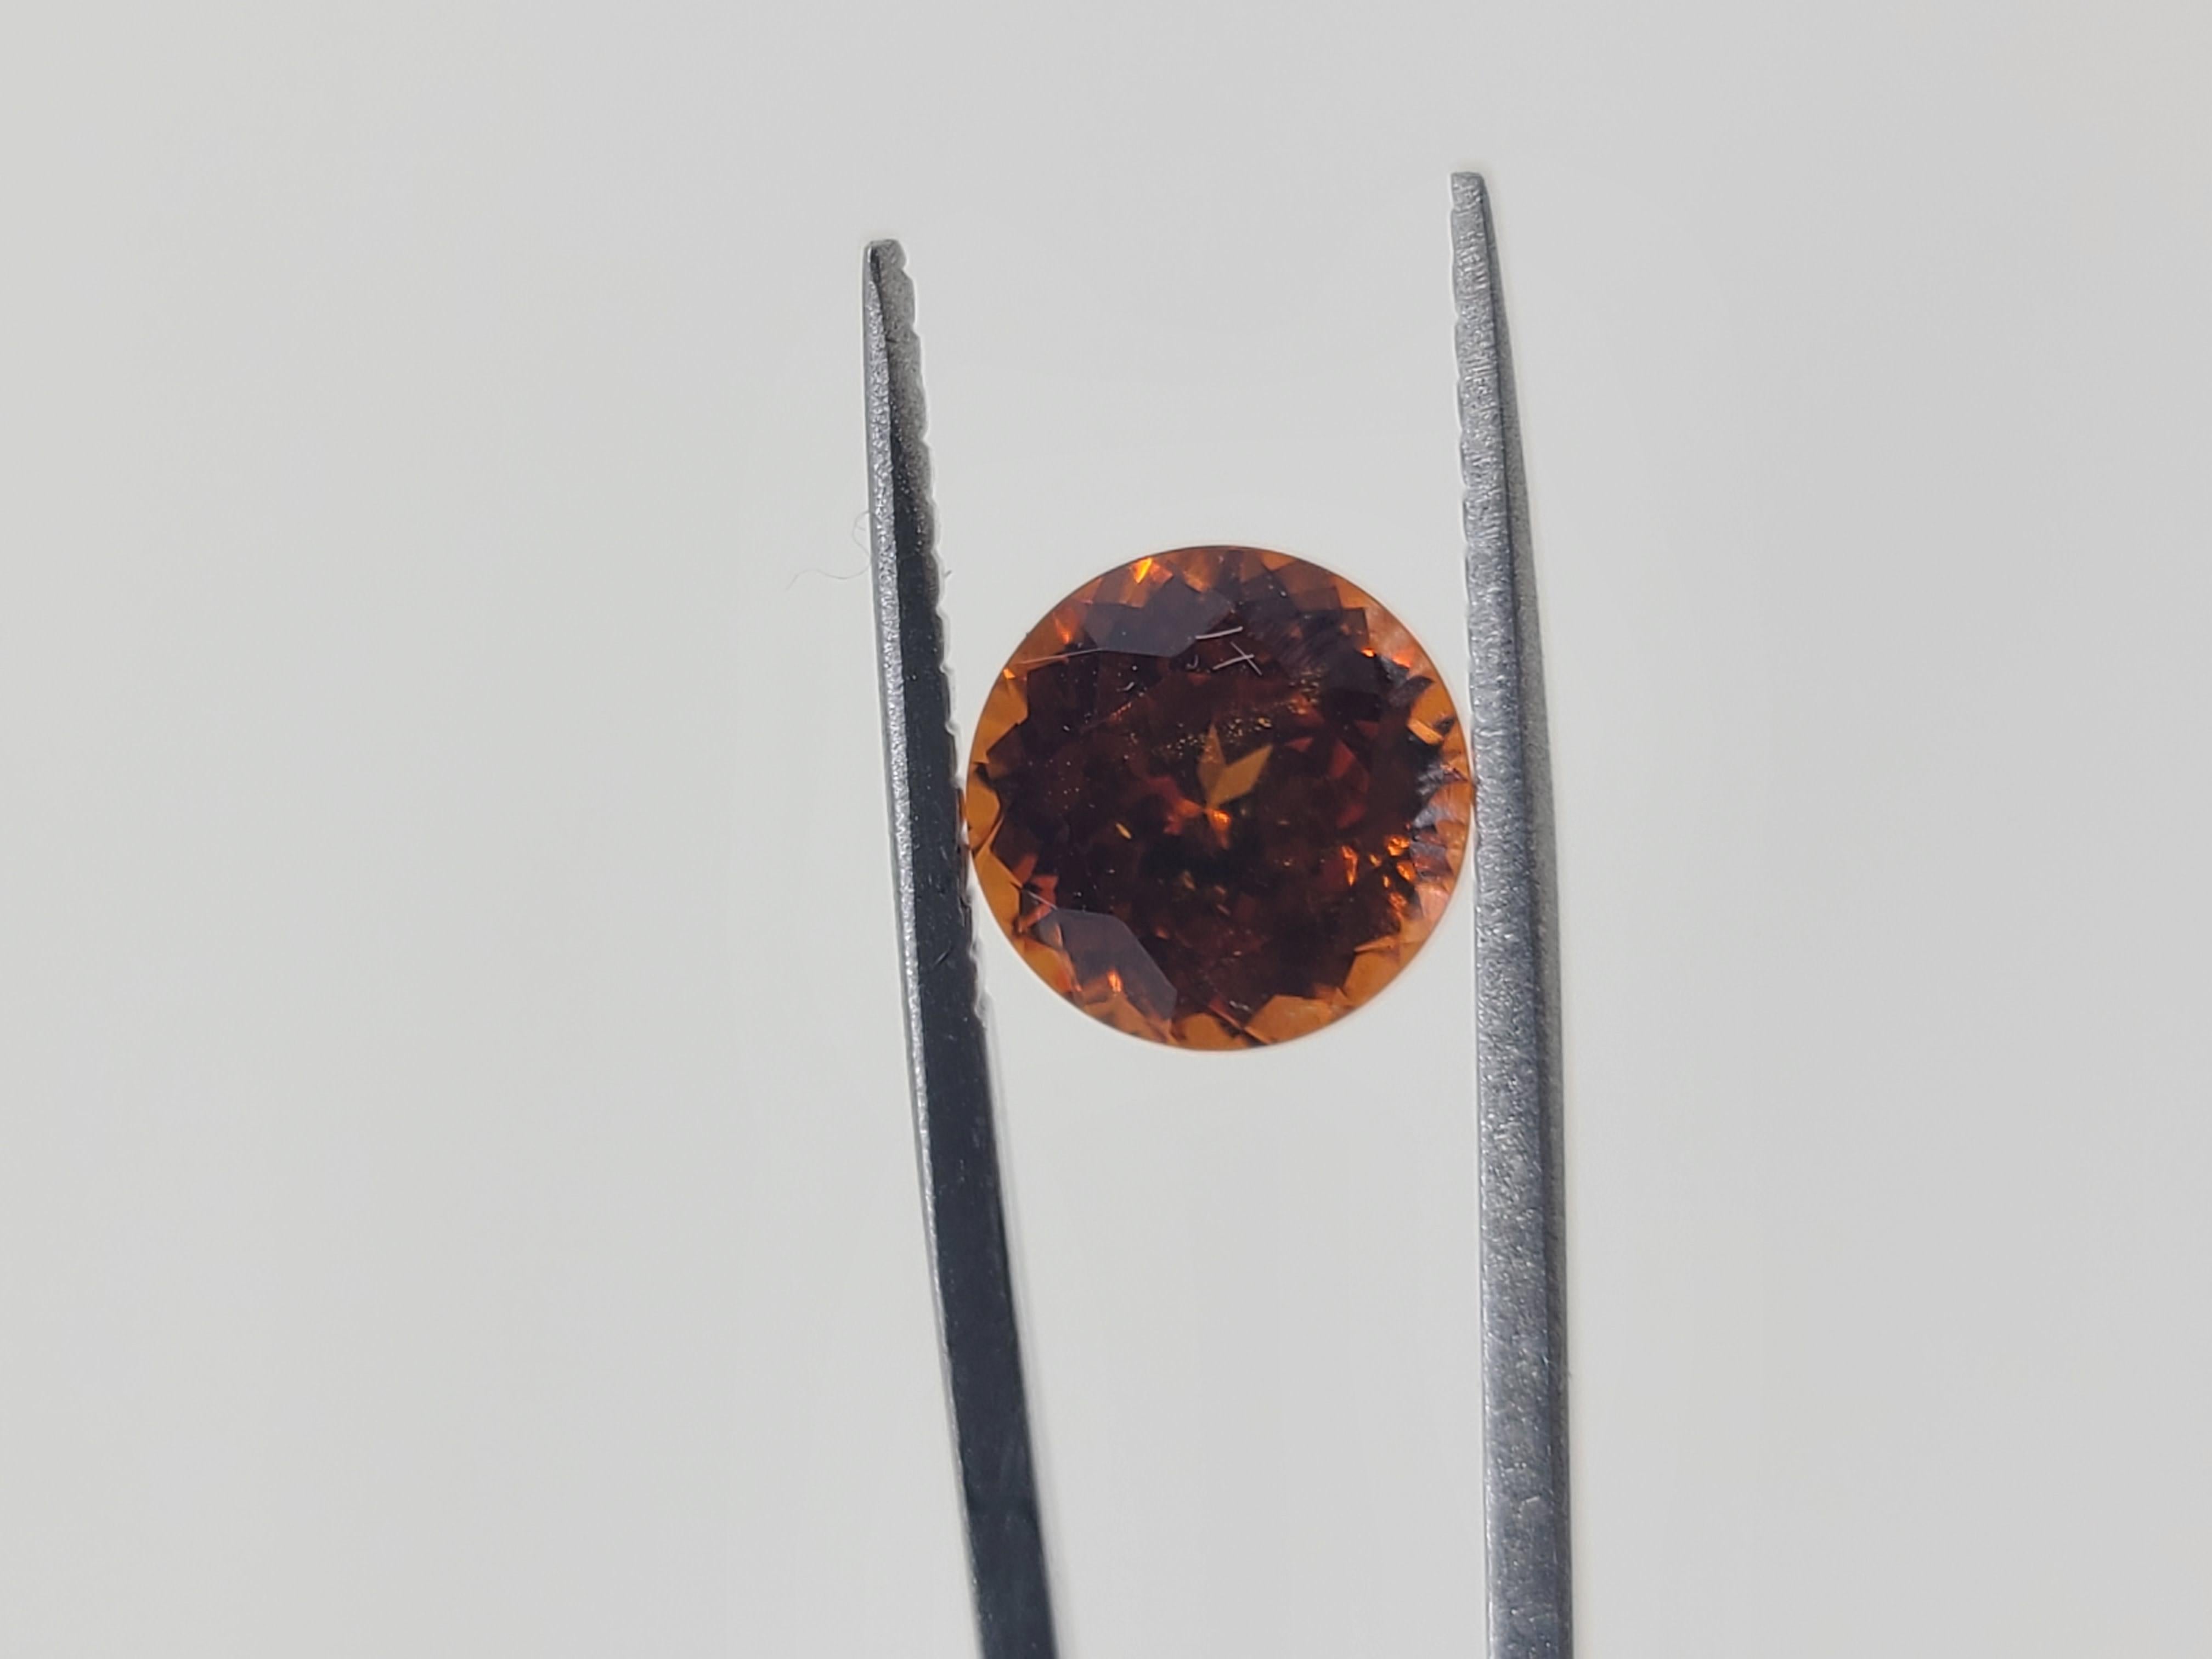 A must-have for the avid gemstone collector, or set this stunning spessartine garnet into your next jewelry design. 

This naturally stunning garnet exhibits a deep yellow and reddish-orange hues, amplified by its symmetrical shape measuring 8mm